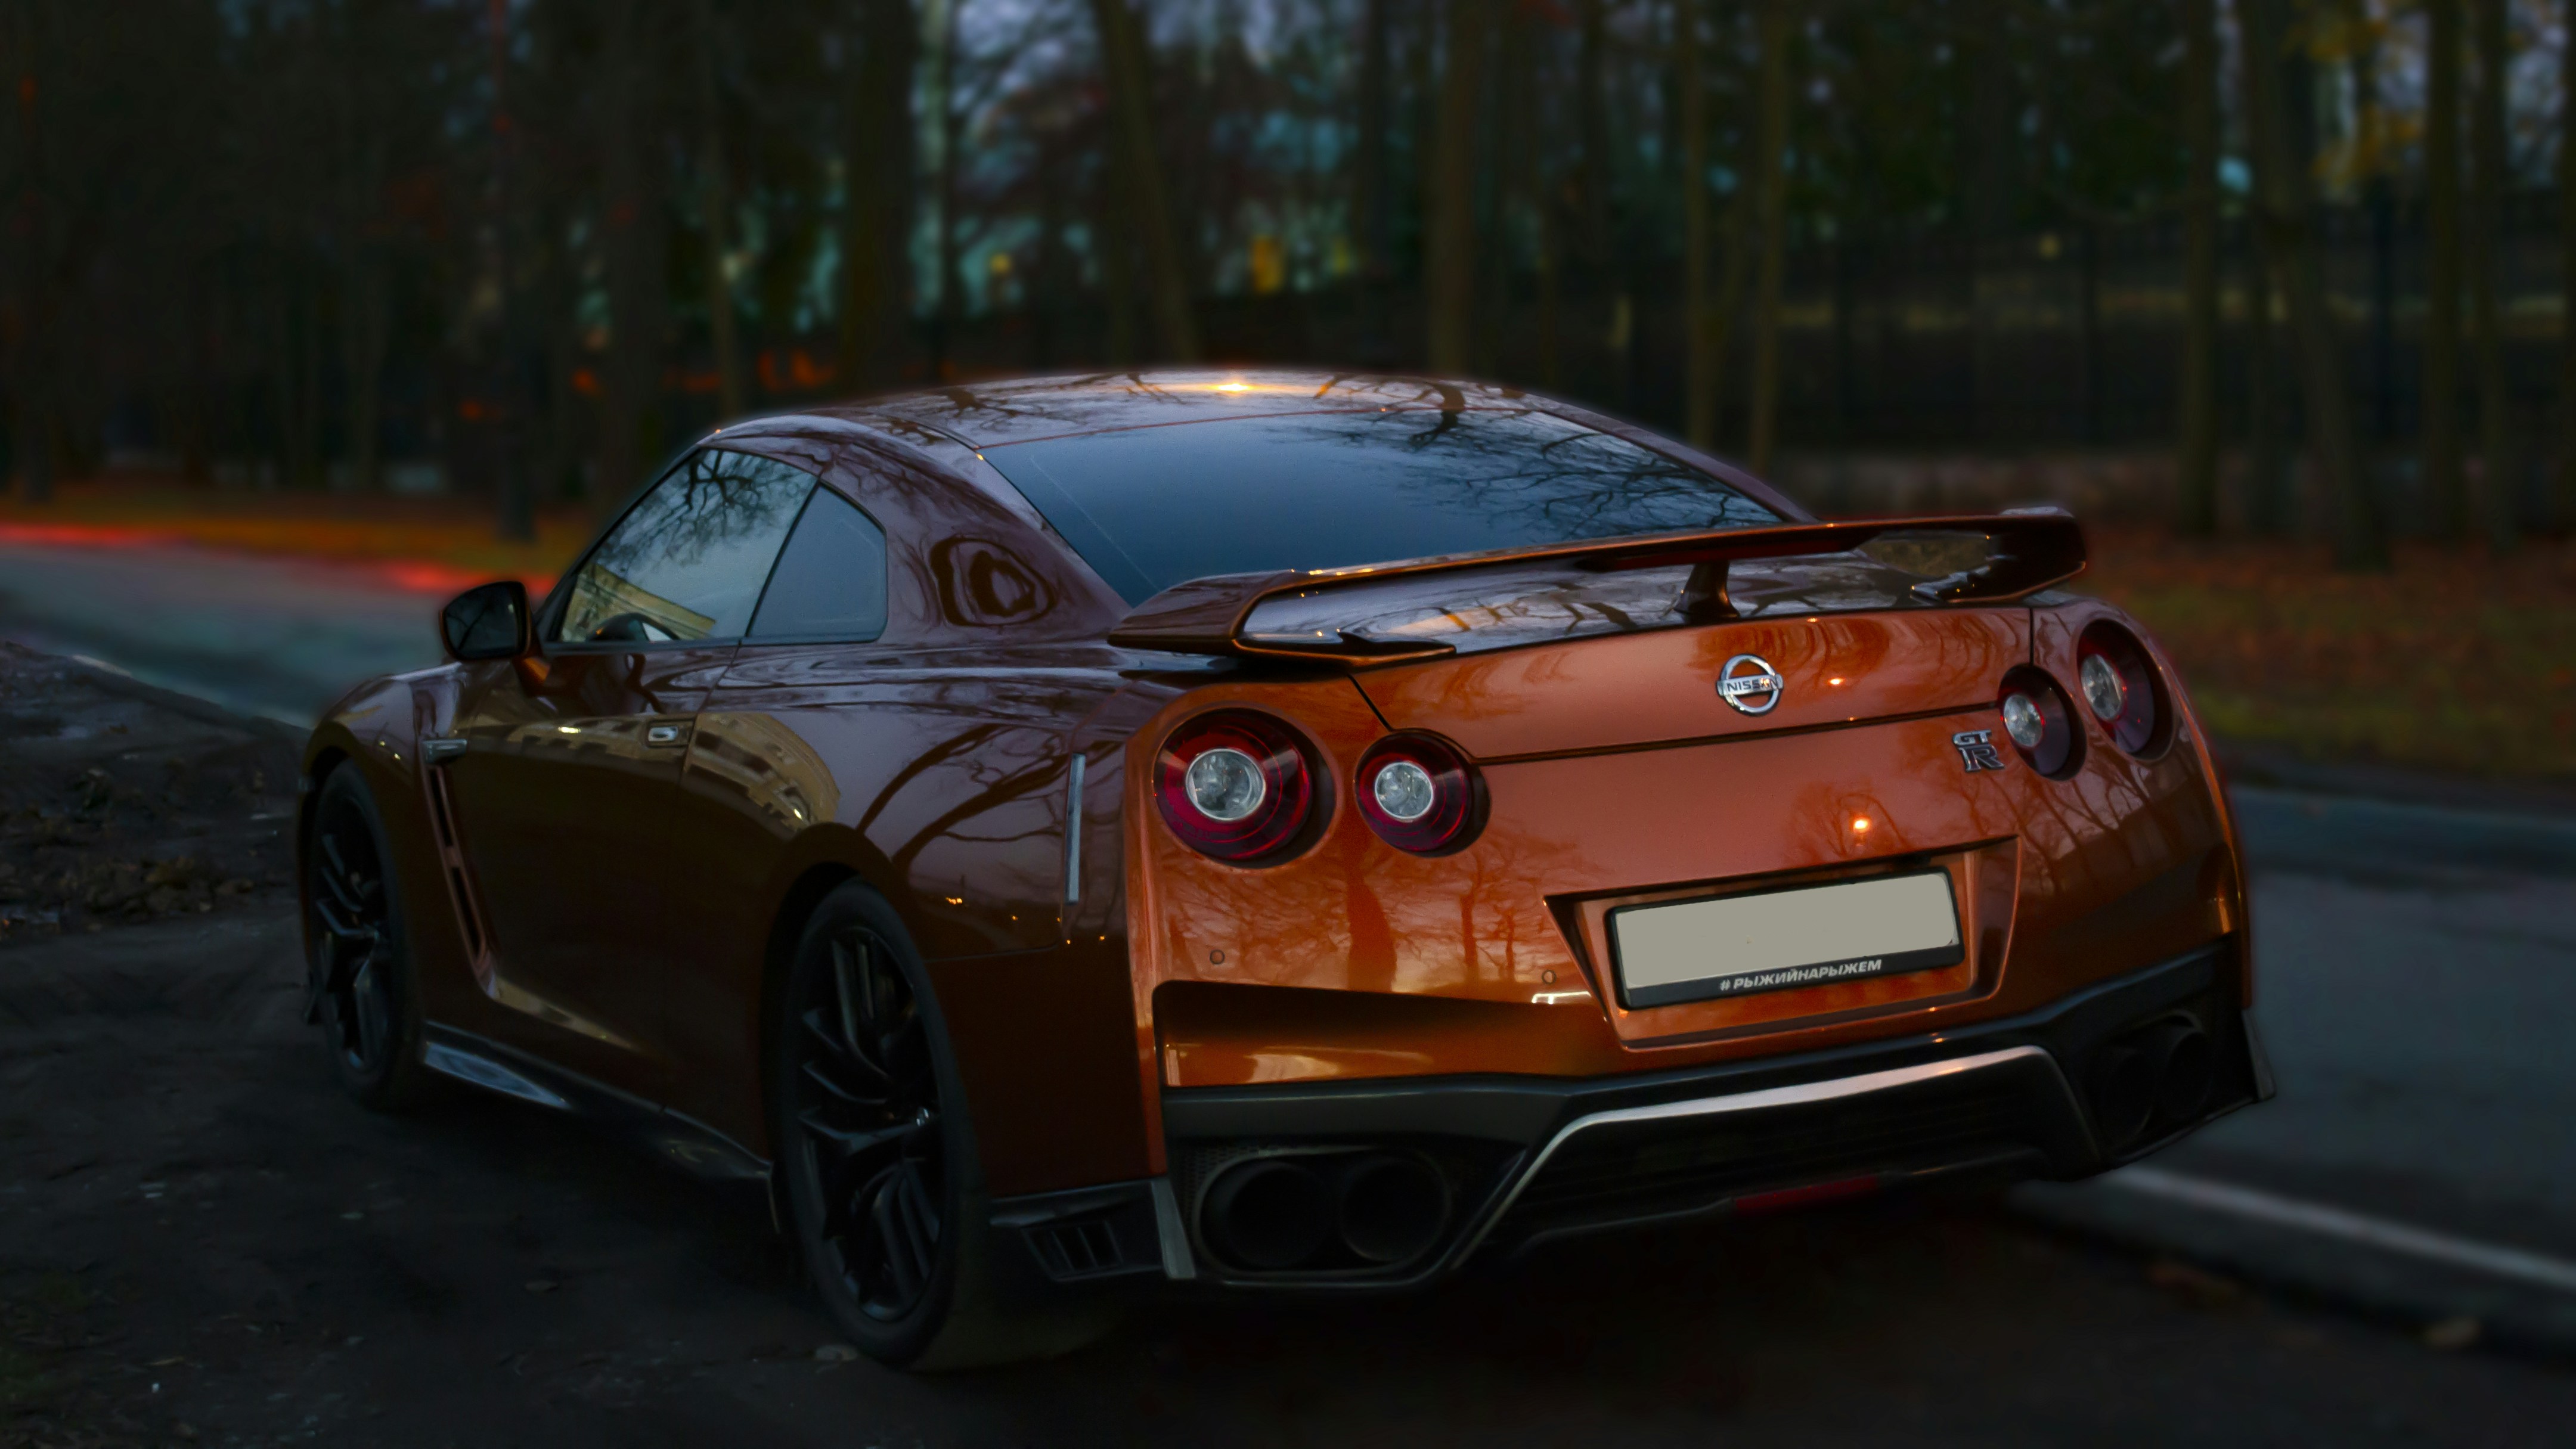 The Nissan GT-R is a high-performance sports car and grand tourer produced by Nissan that was unveiled in 2007.